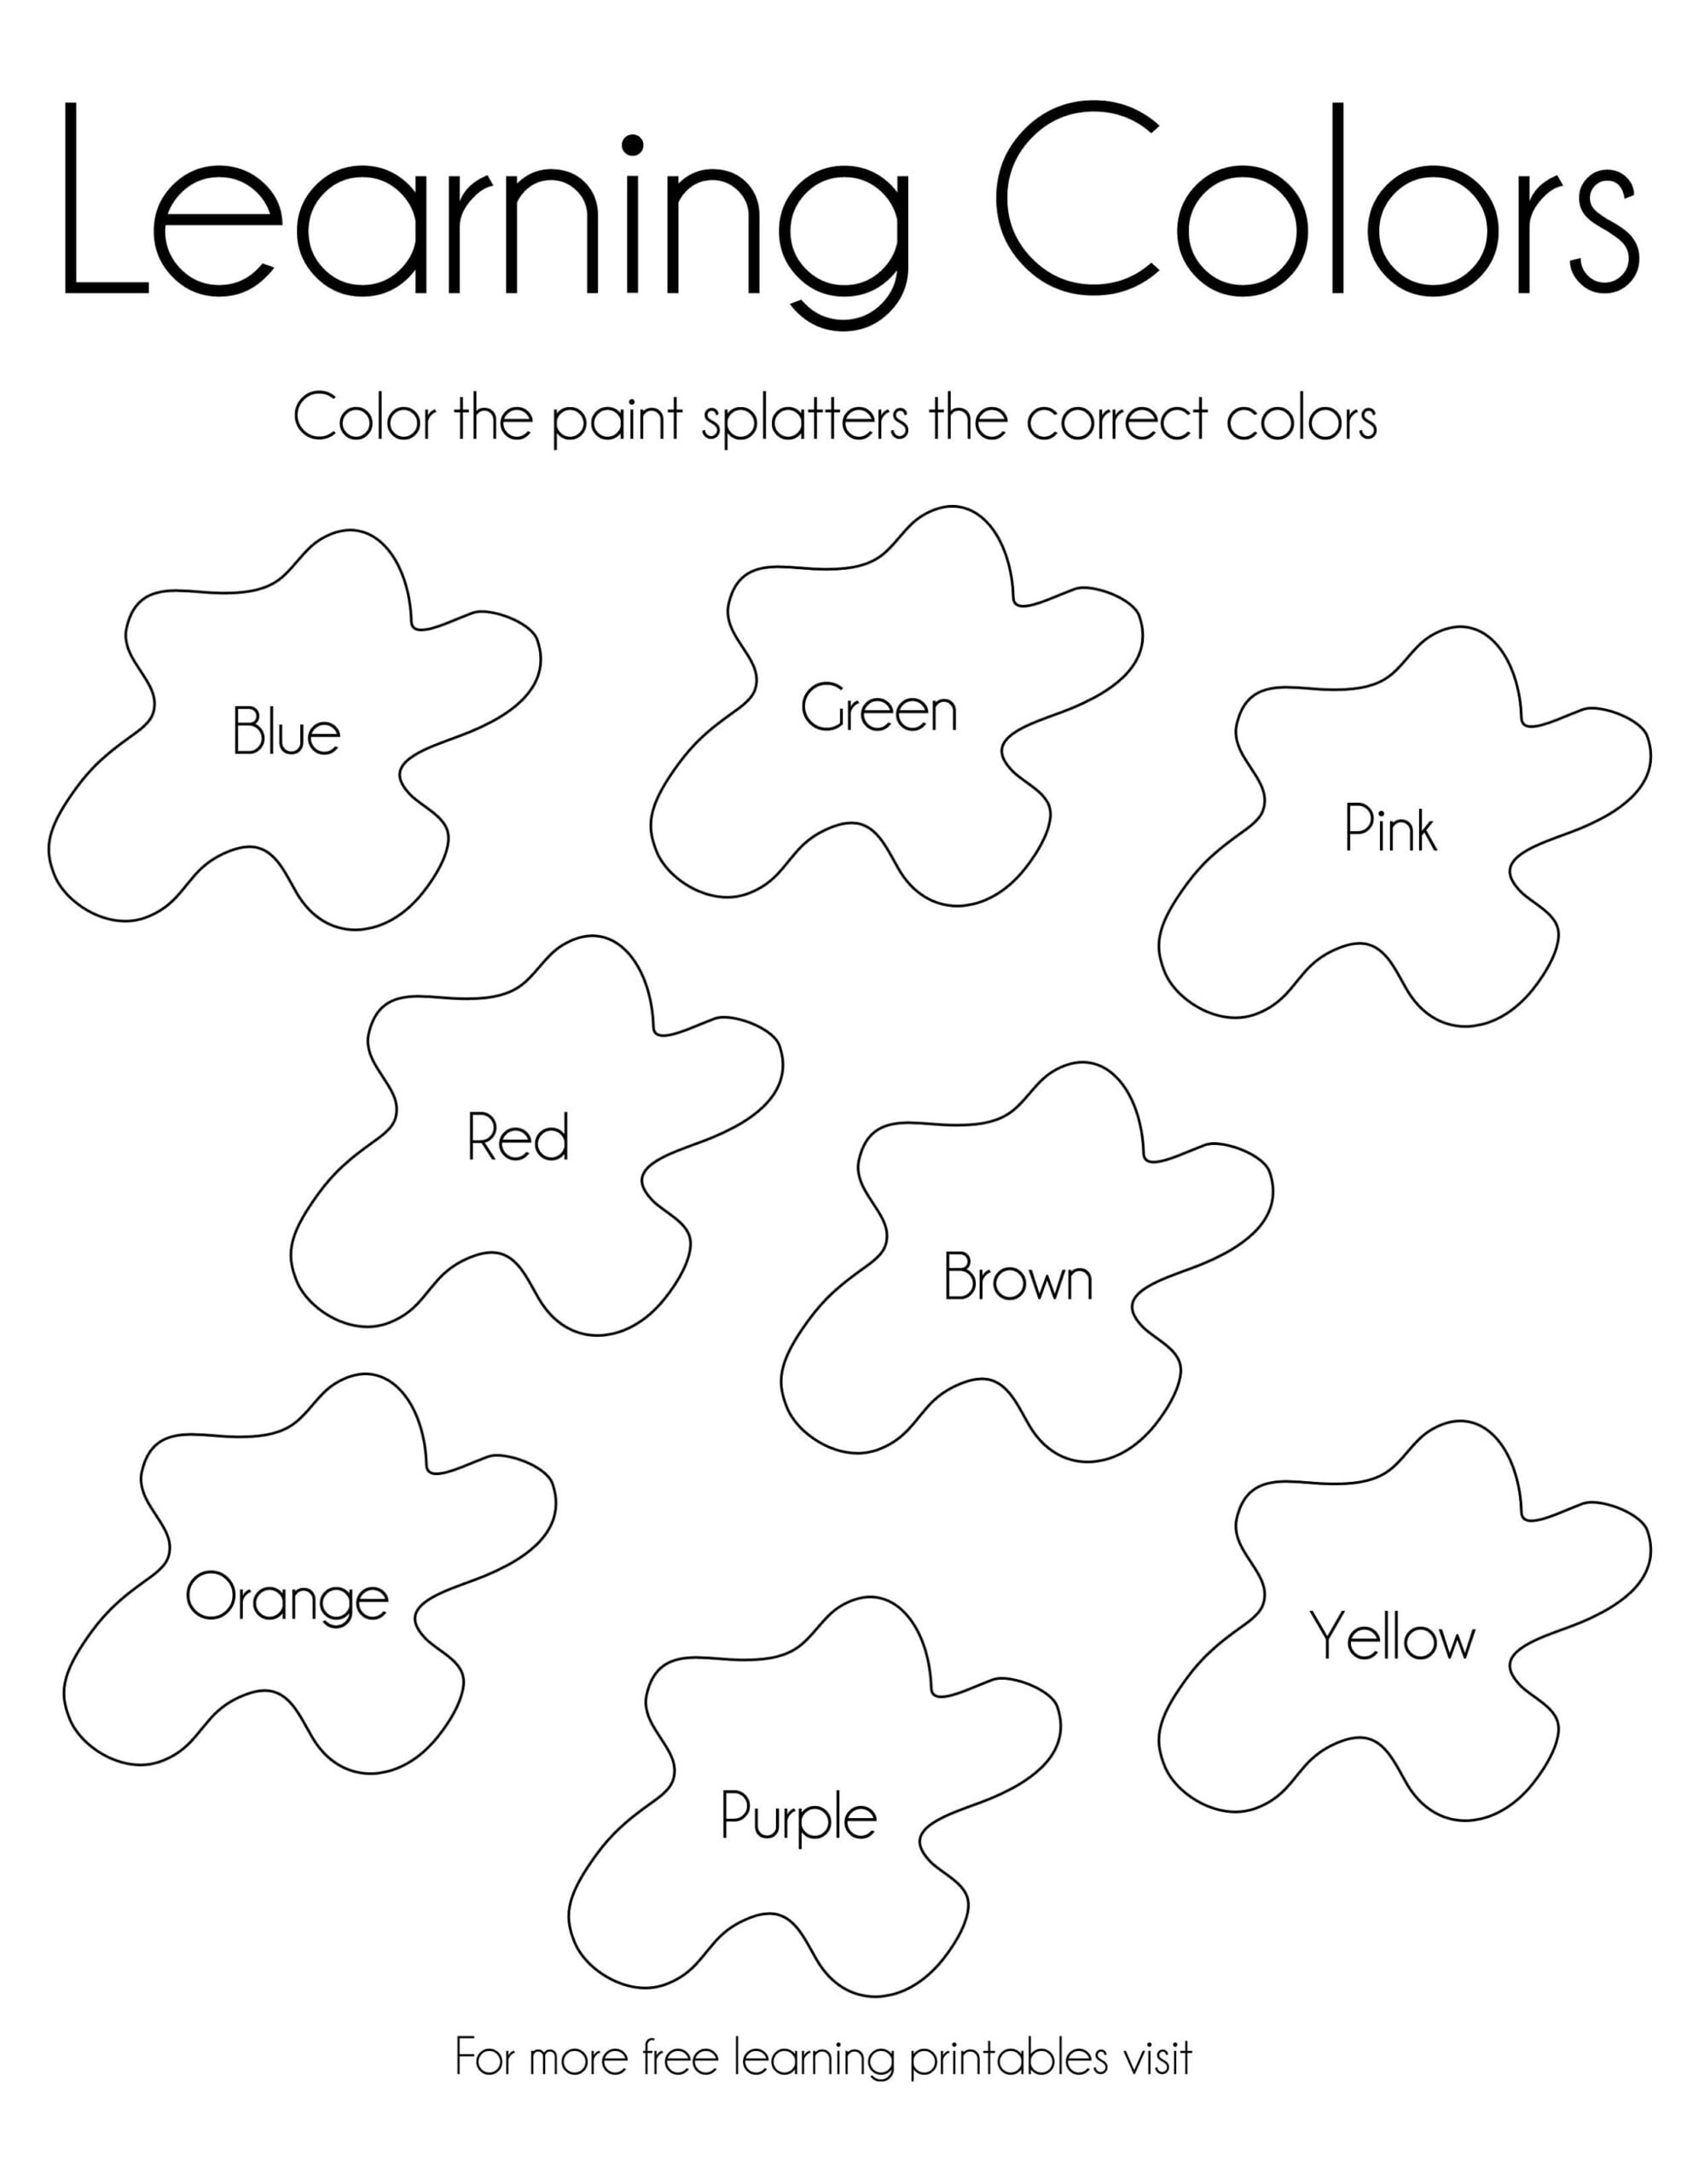 Activity Sheets For 5 Year Olds Learning Colors K5 Worksheets Learning Colors Activities For 5 Year Olds Learning Printables